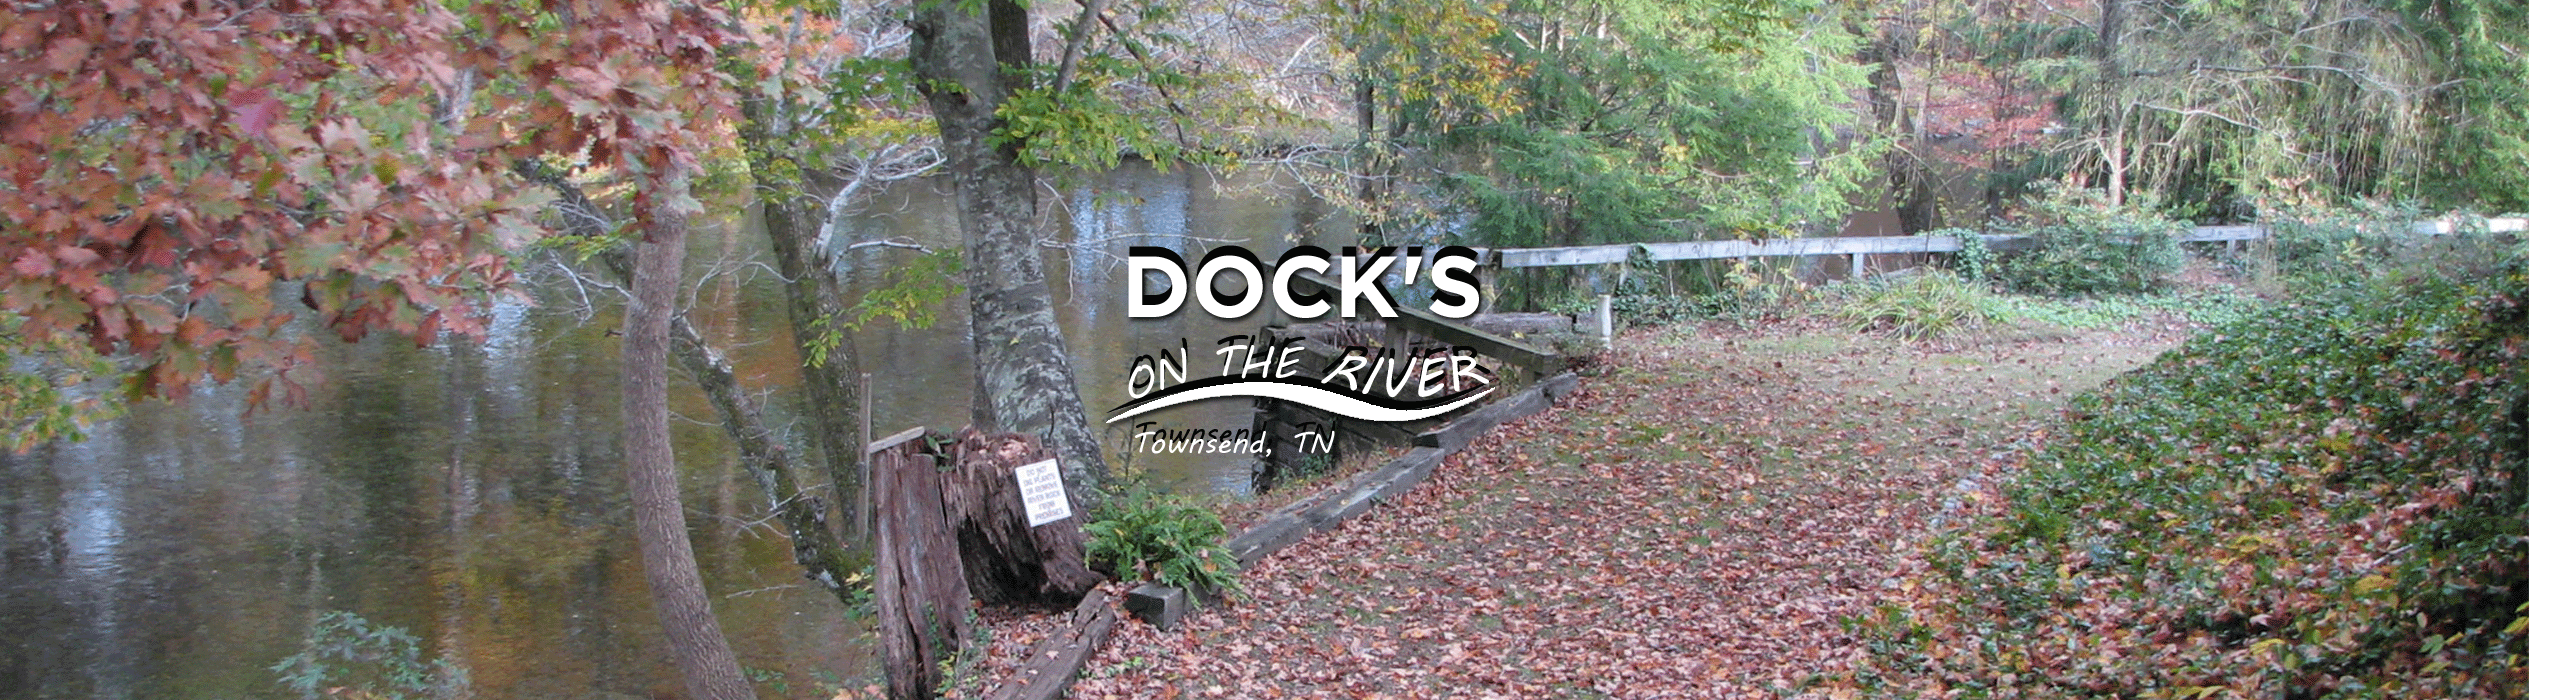 Dock’s On The River Motel and Cabins Townsend TN